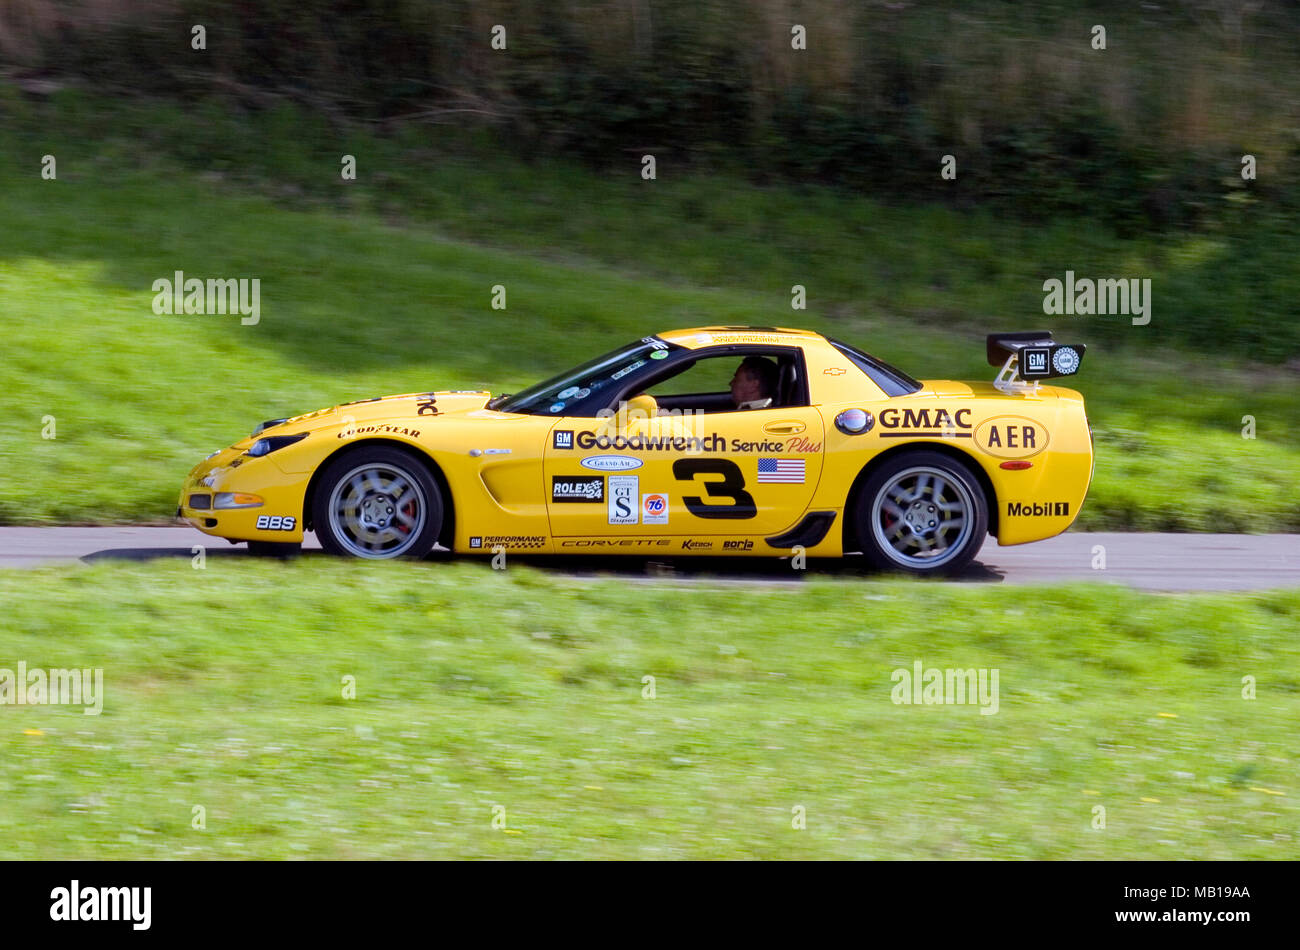 Yellow Chevrolet Corvette racing car in profile (side view) and driving fast. Stock Photo